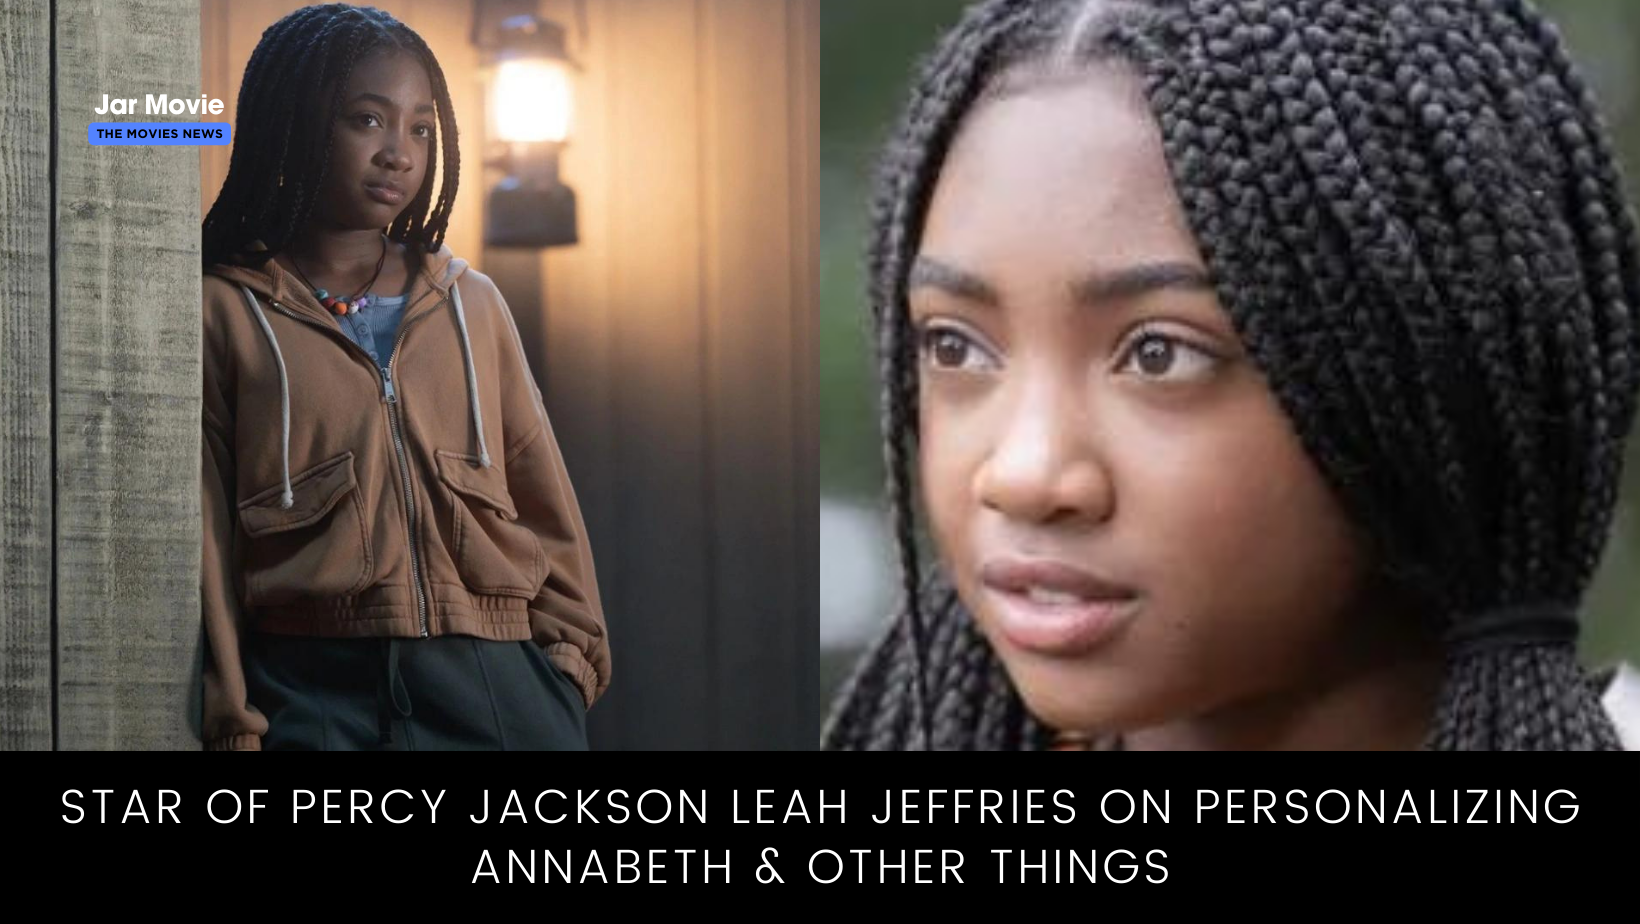 Star of Percy Jackson Leah Jeffries on Personalizing Annabeth & Other Things